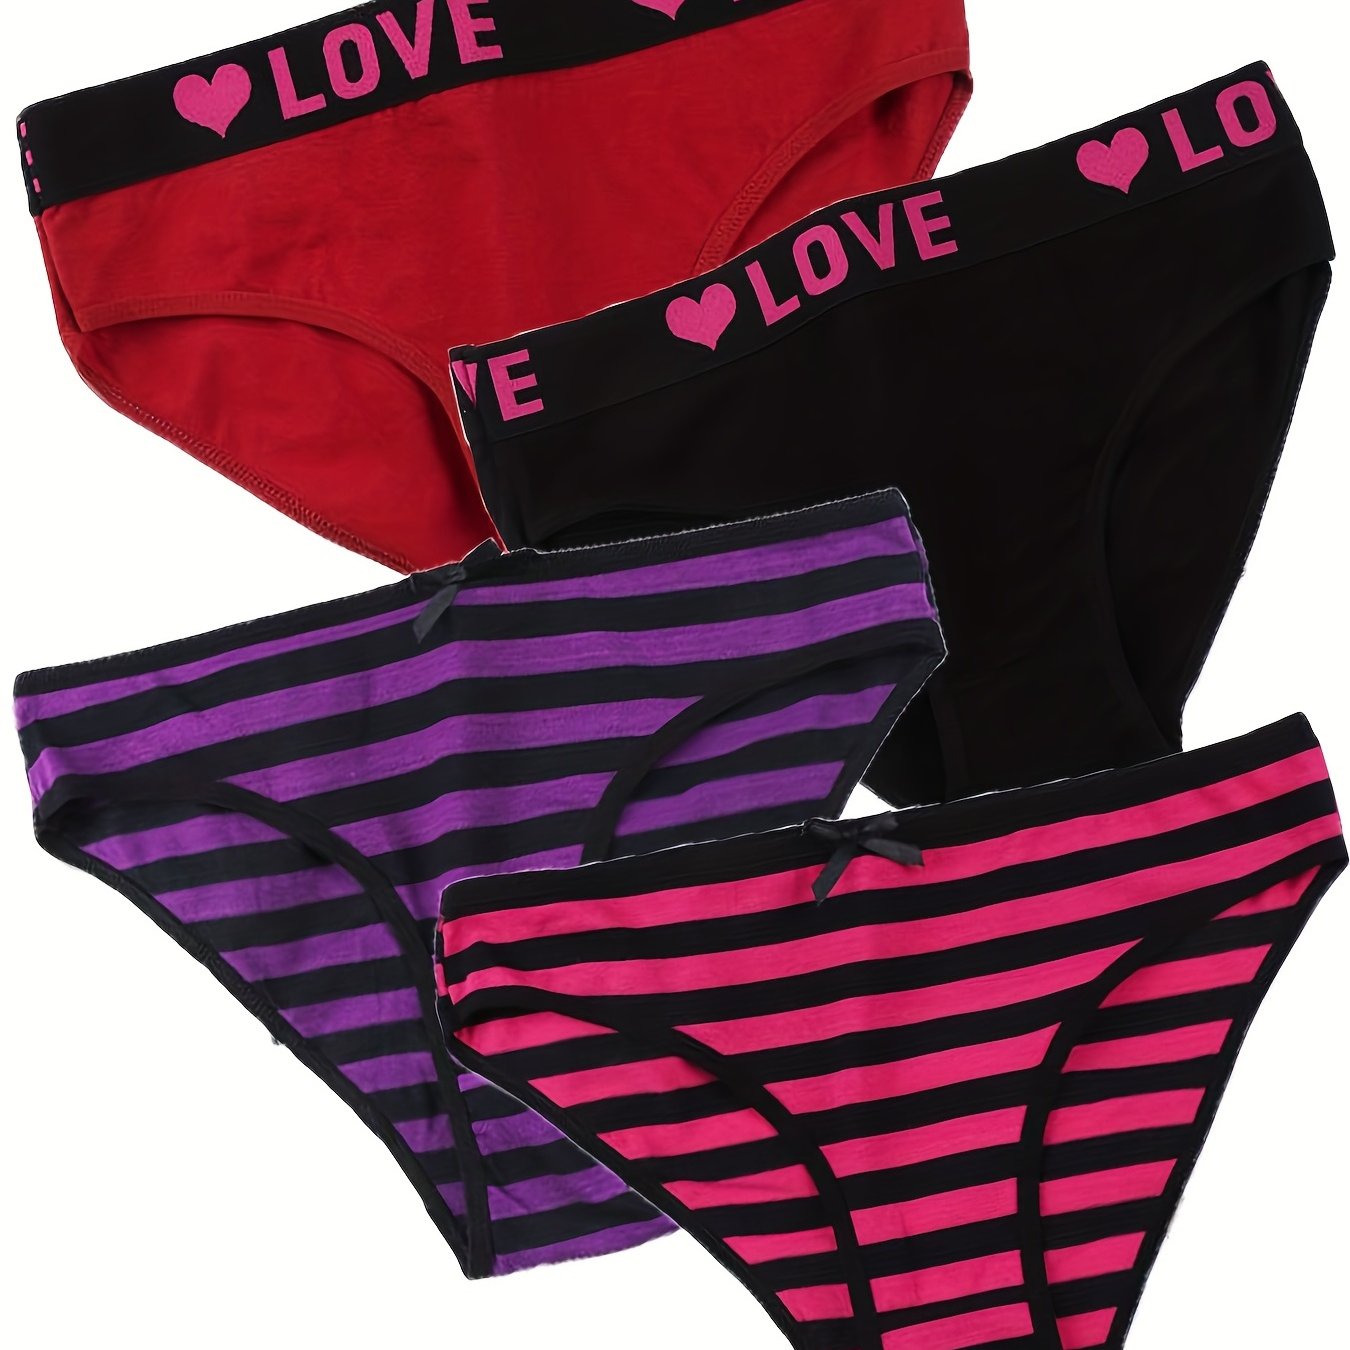 Womens Cotton Print Letters Underwear Striped Panties Casual And Sexy  Lingerie For Ladies From Mart01, $1.03